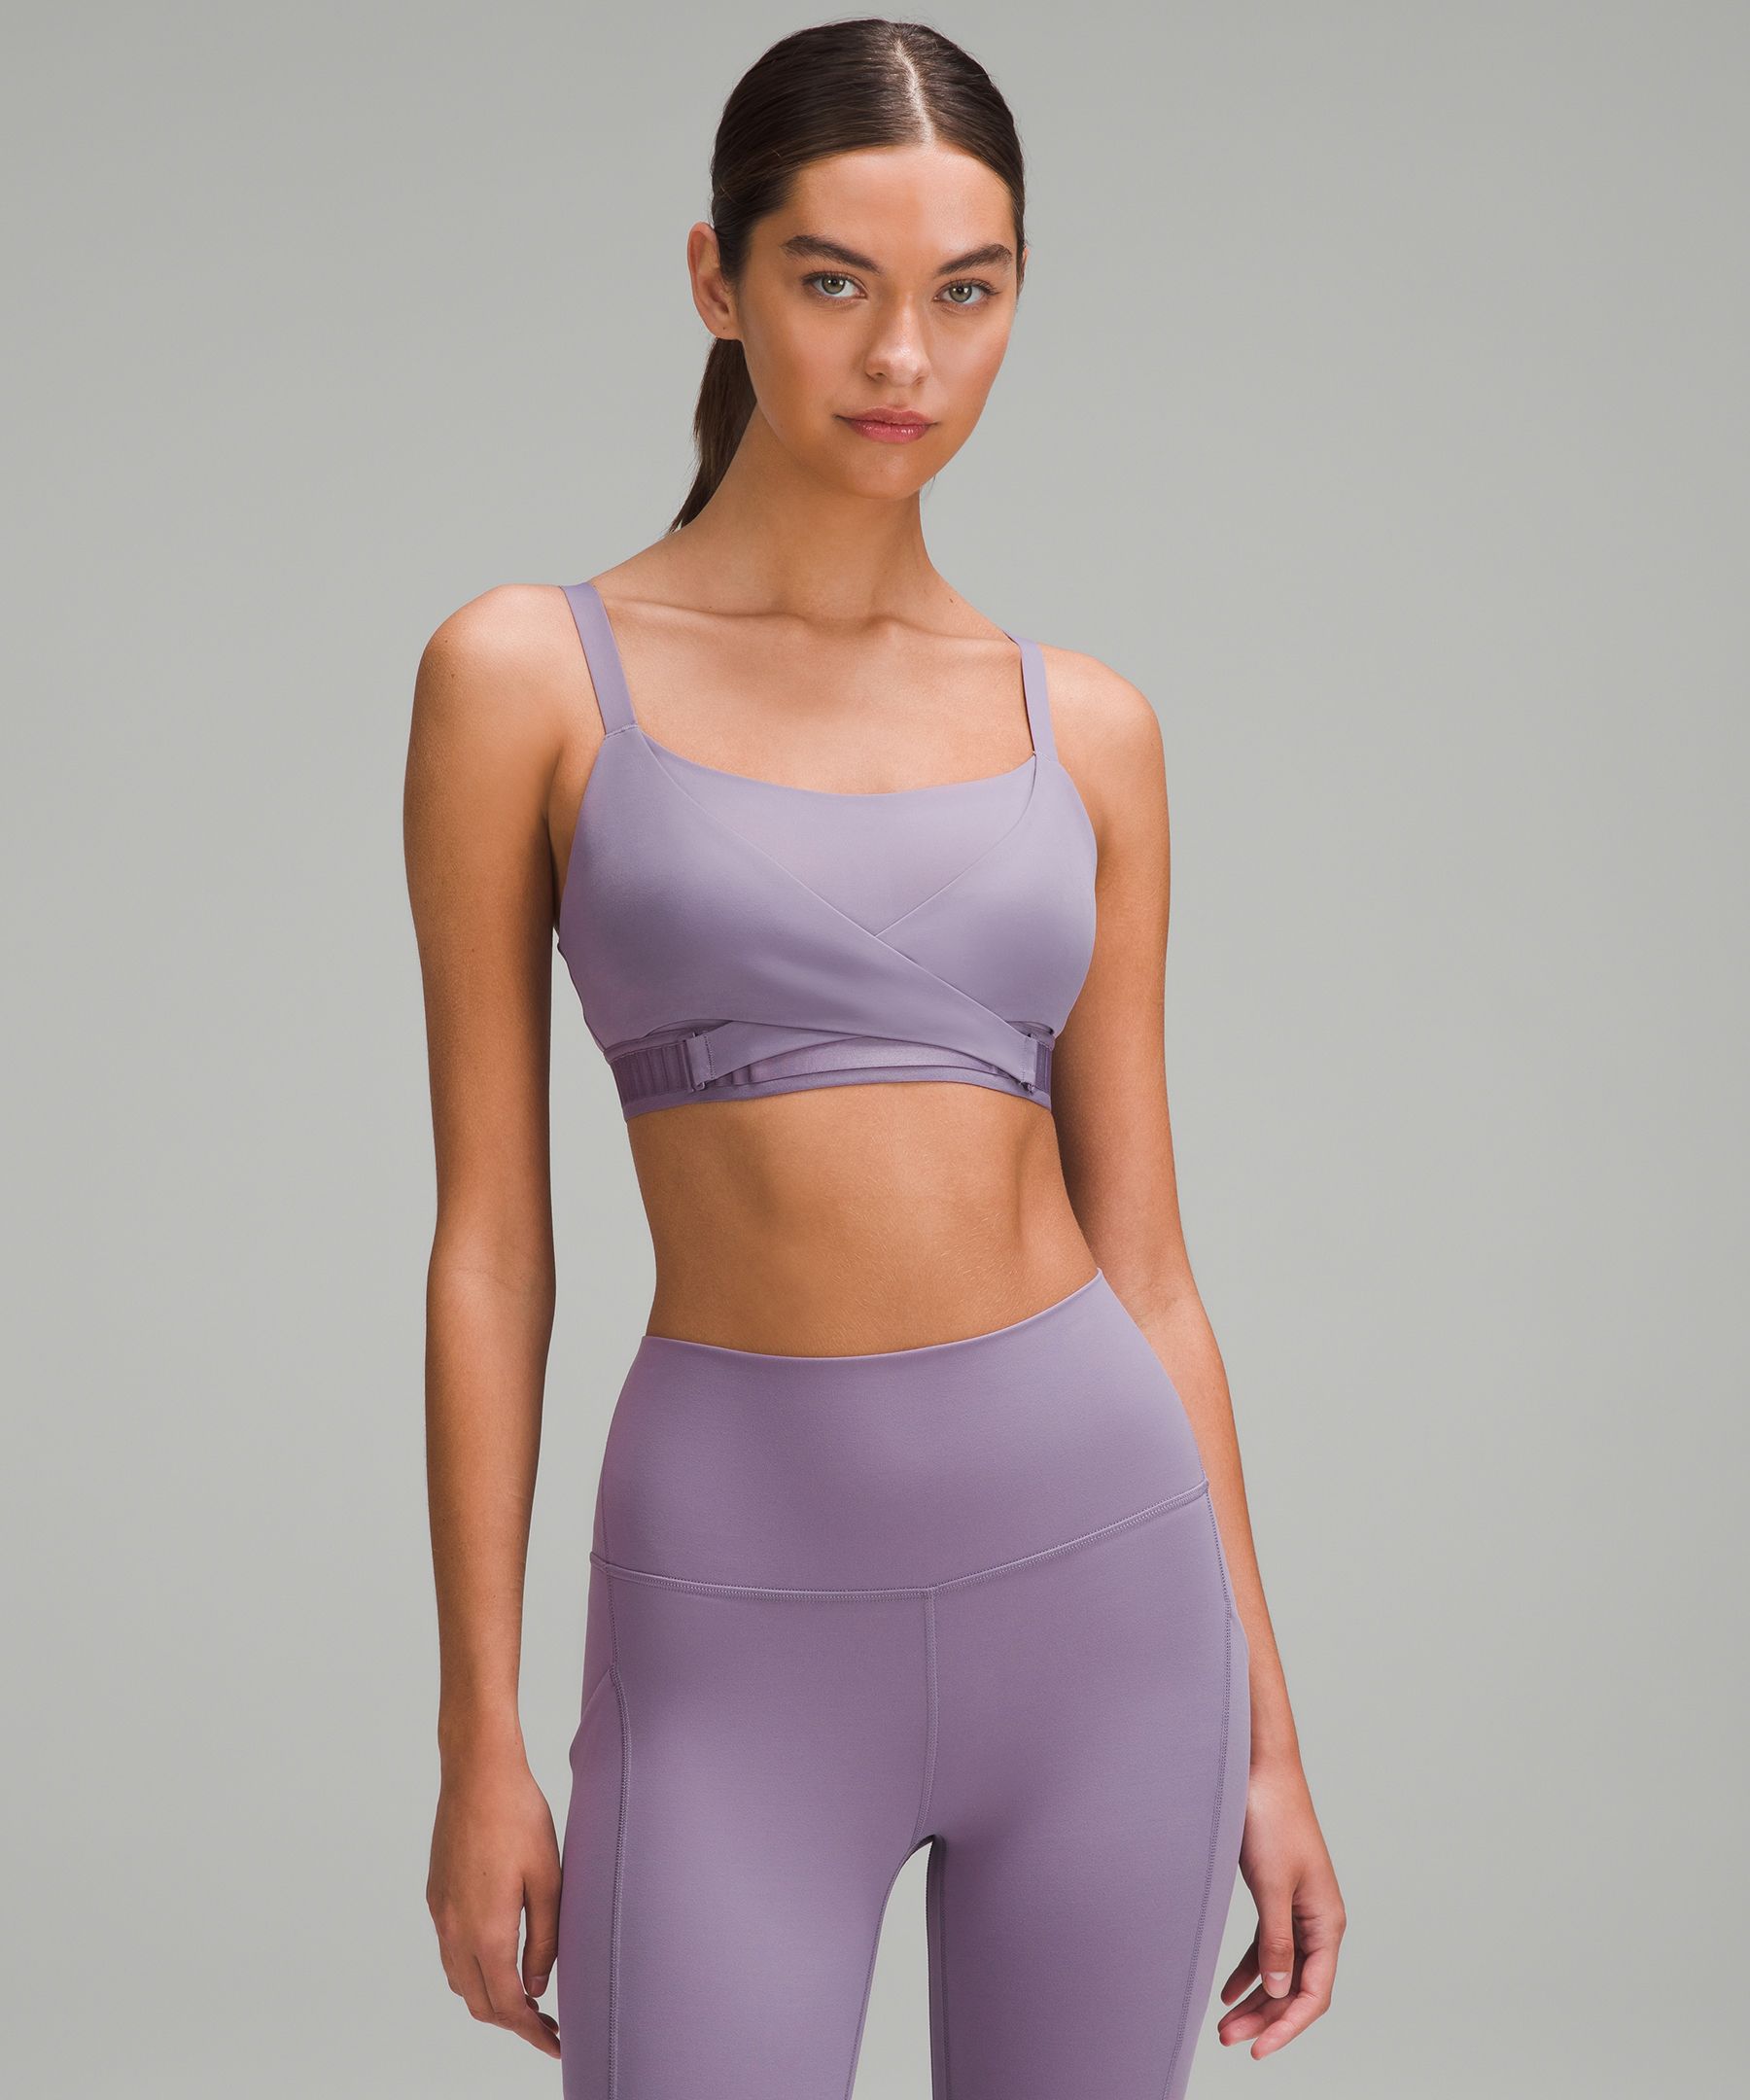 Lululemon 2 in 1 Tank Top with Attached Sports Bra Gray/Lavender Purple 6